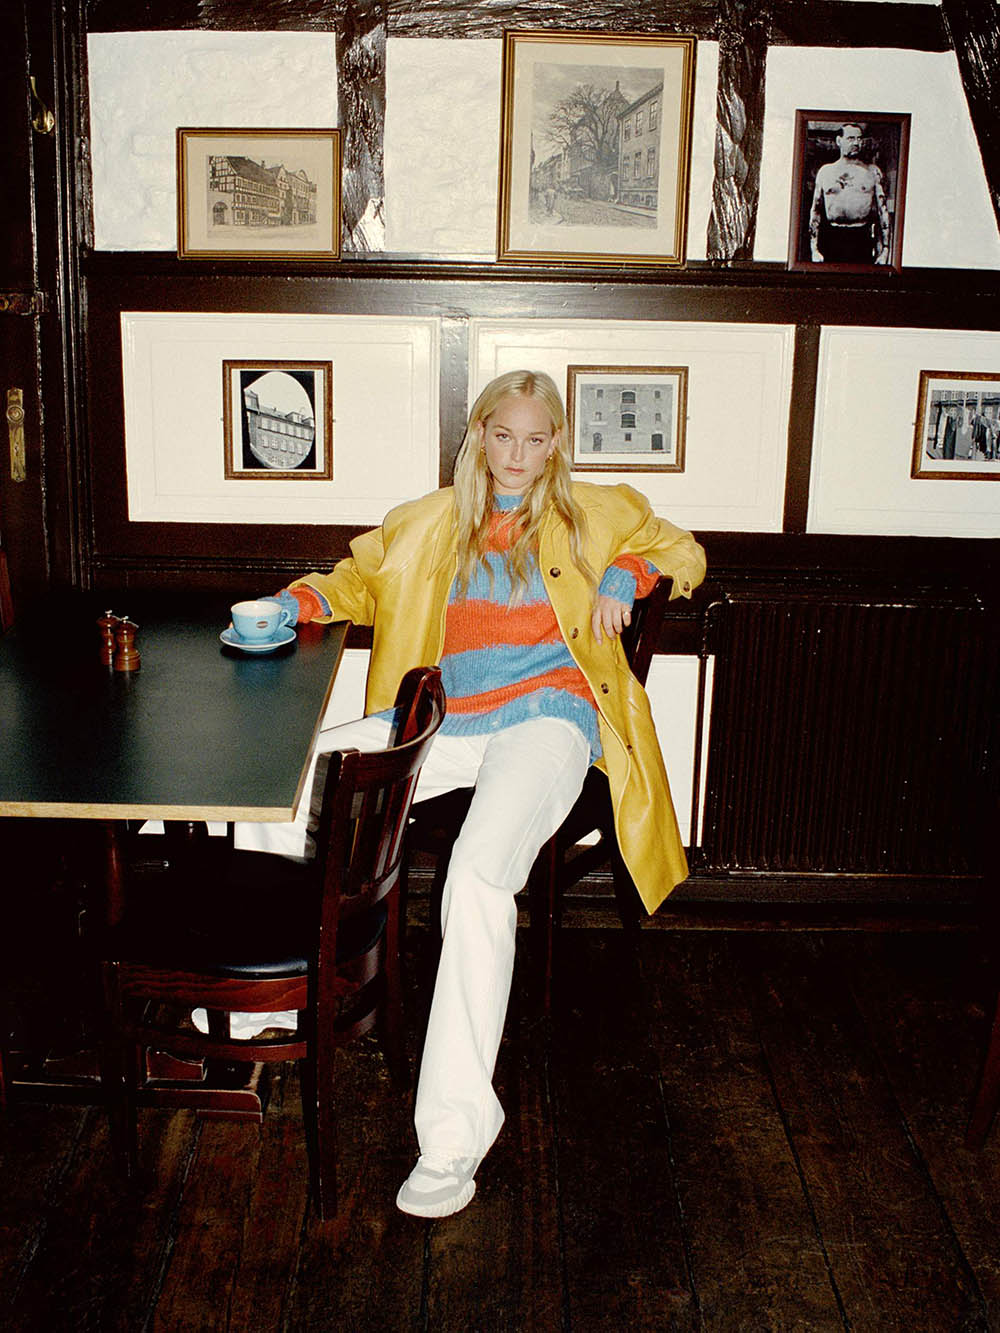 Jean Campbell covers Porter Edit September 27th, 2019 by Quentin De Briey